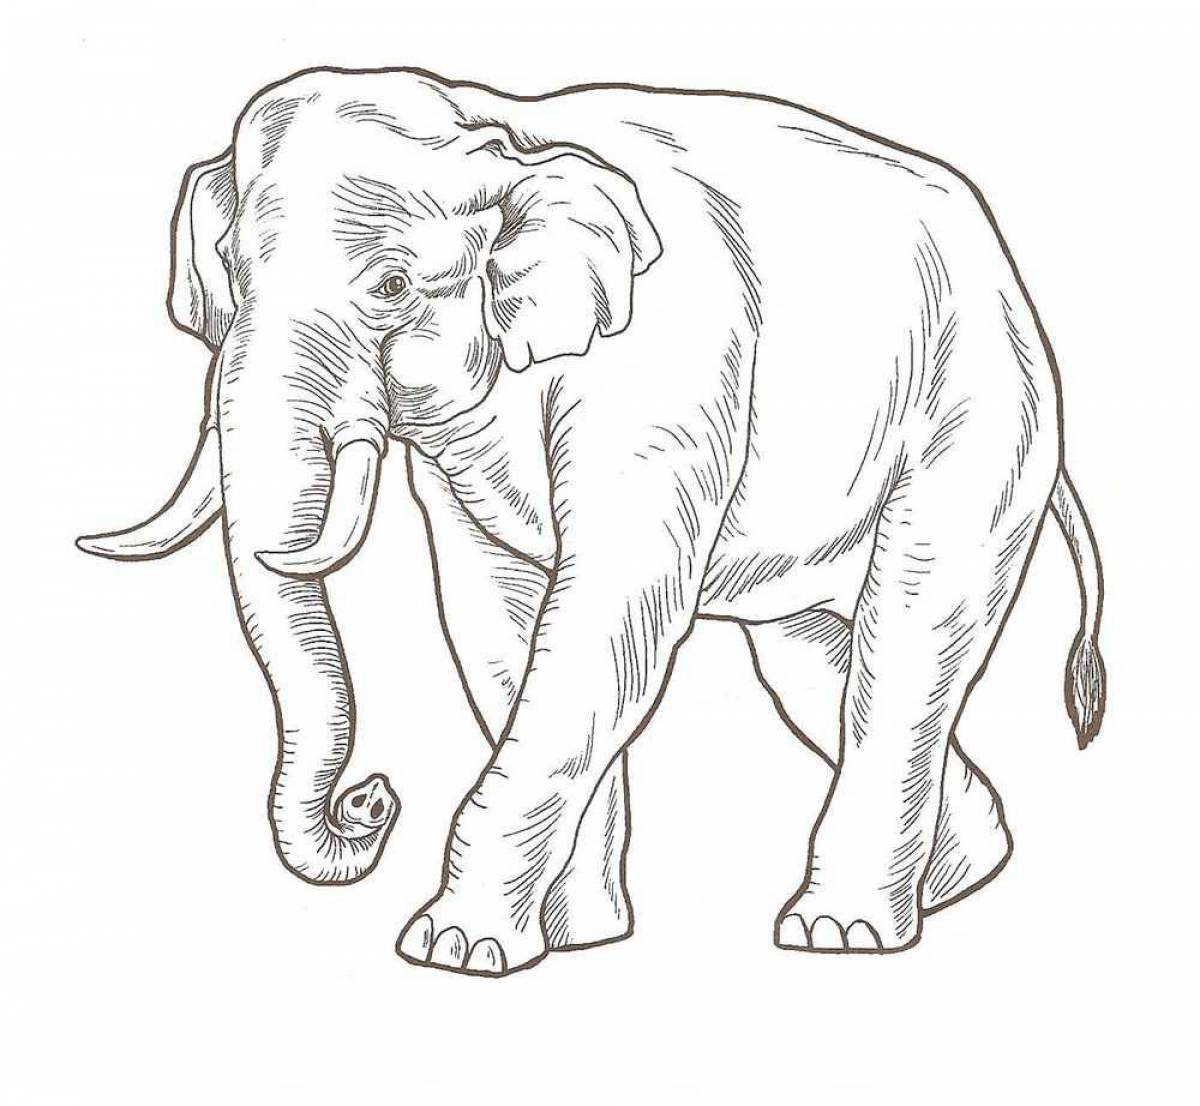 Coloring elephants for kids